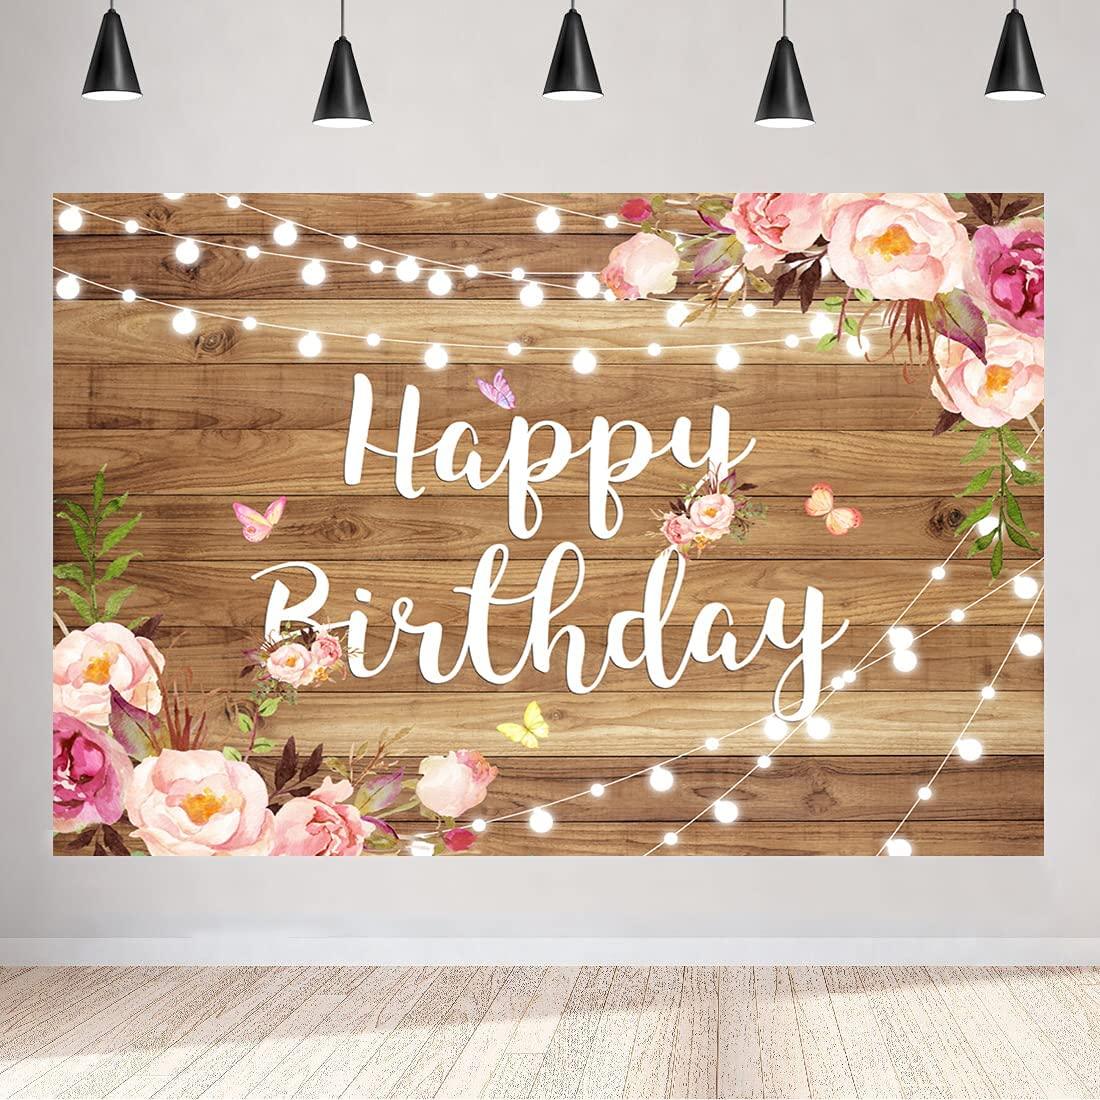 Pink Floral Happy Birthday Backdrop Butterfly Wooden Floor Watercolor Flowers Girls Birthday Party Decorations - If you say i do